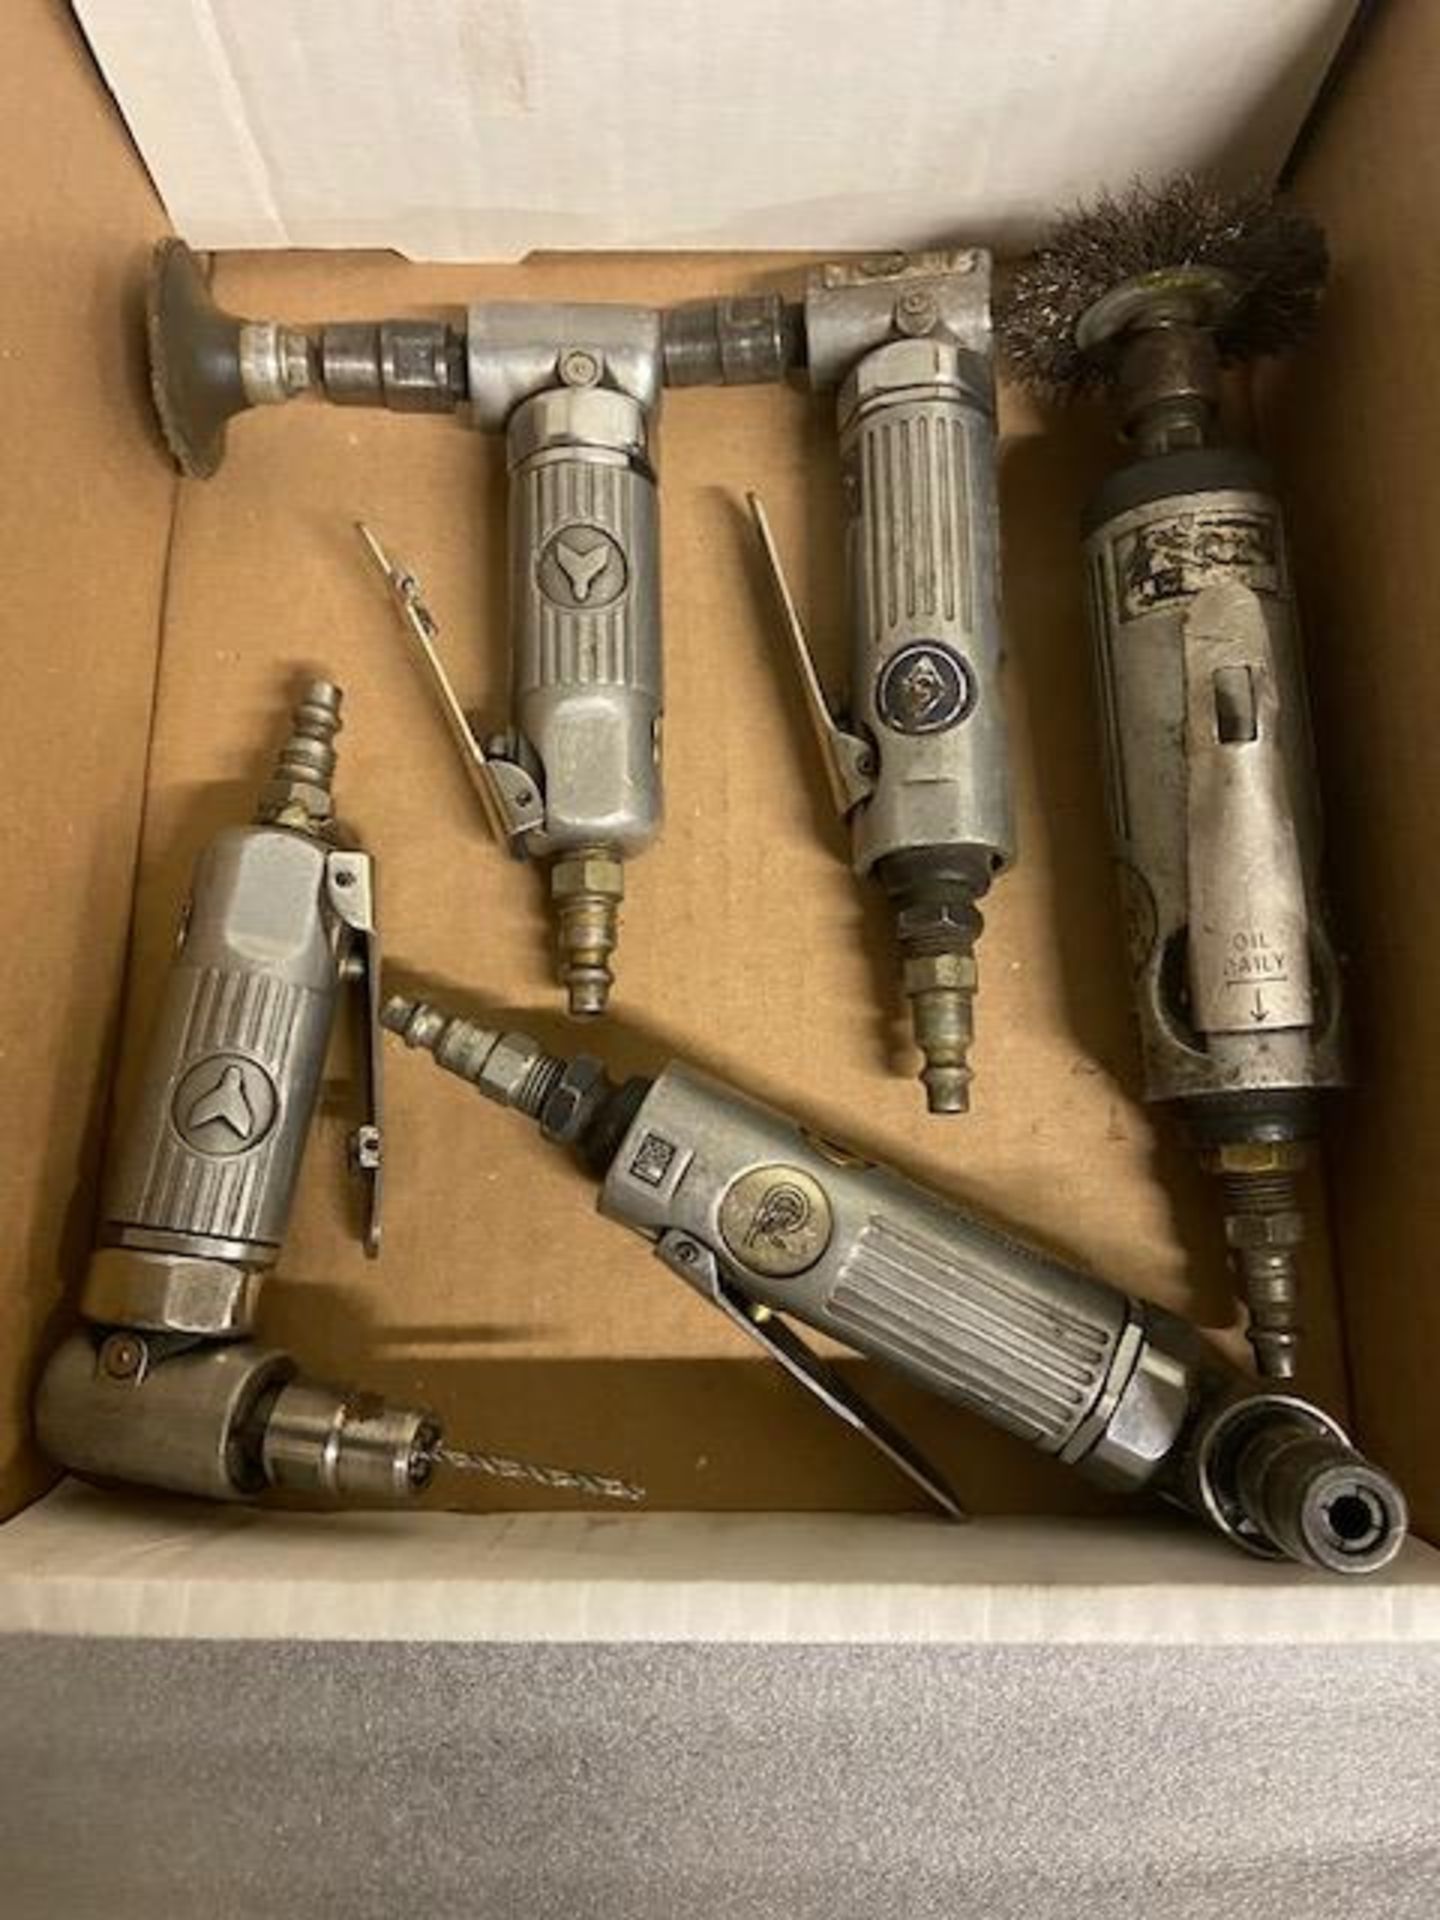 Lot of 5 units Air Die Grinder units with attachments and right angle units